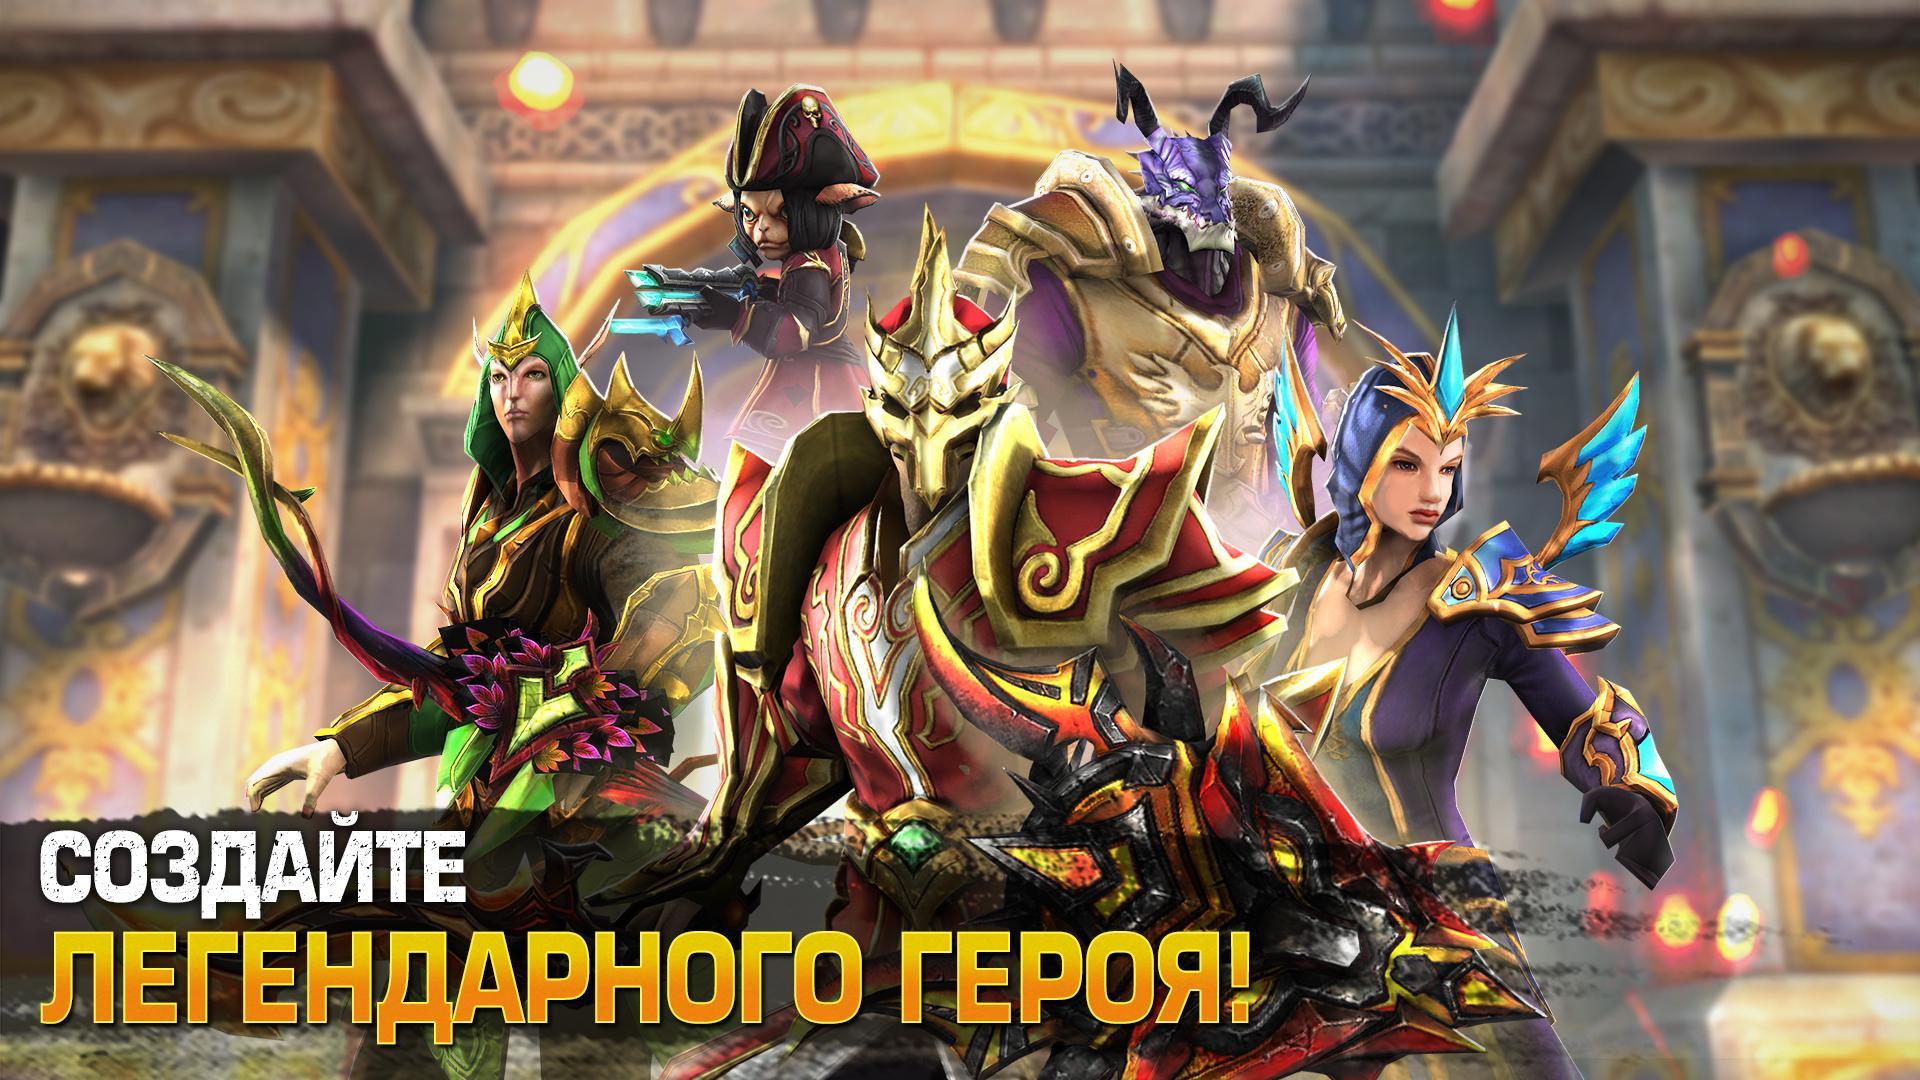 And apk chaos order Heroes of